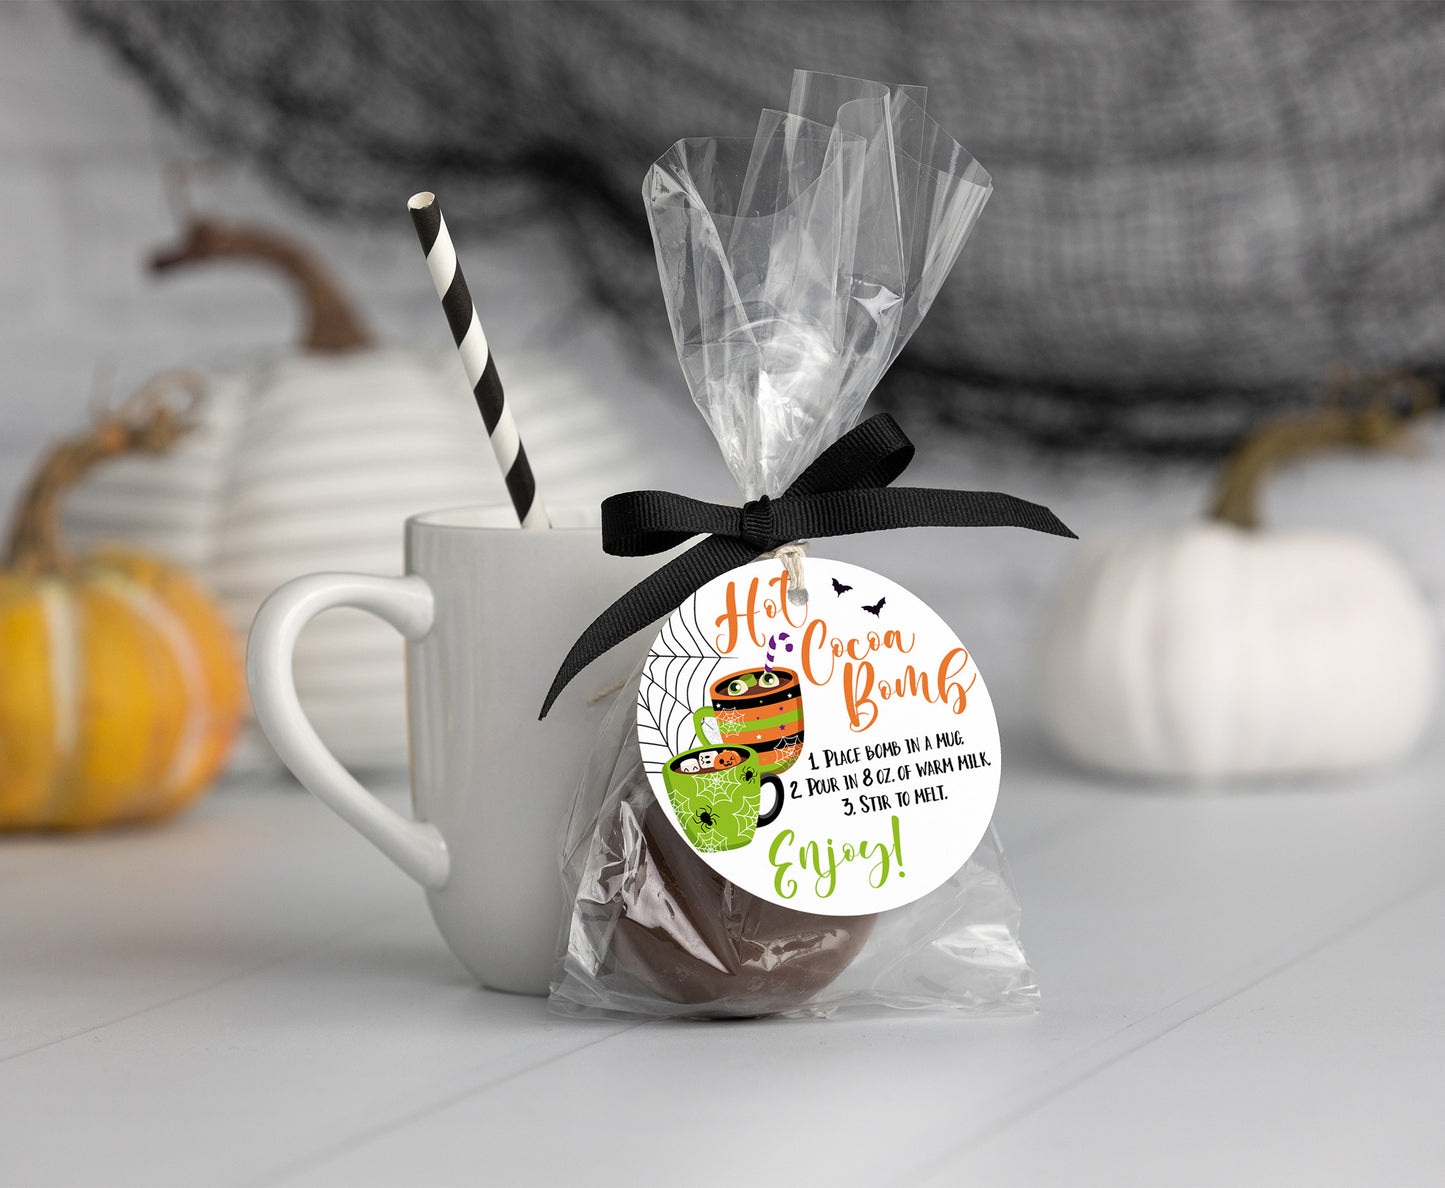 Hot Cocoa Bomb Tags 2"x2" | Halloween Favor Tags - 115